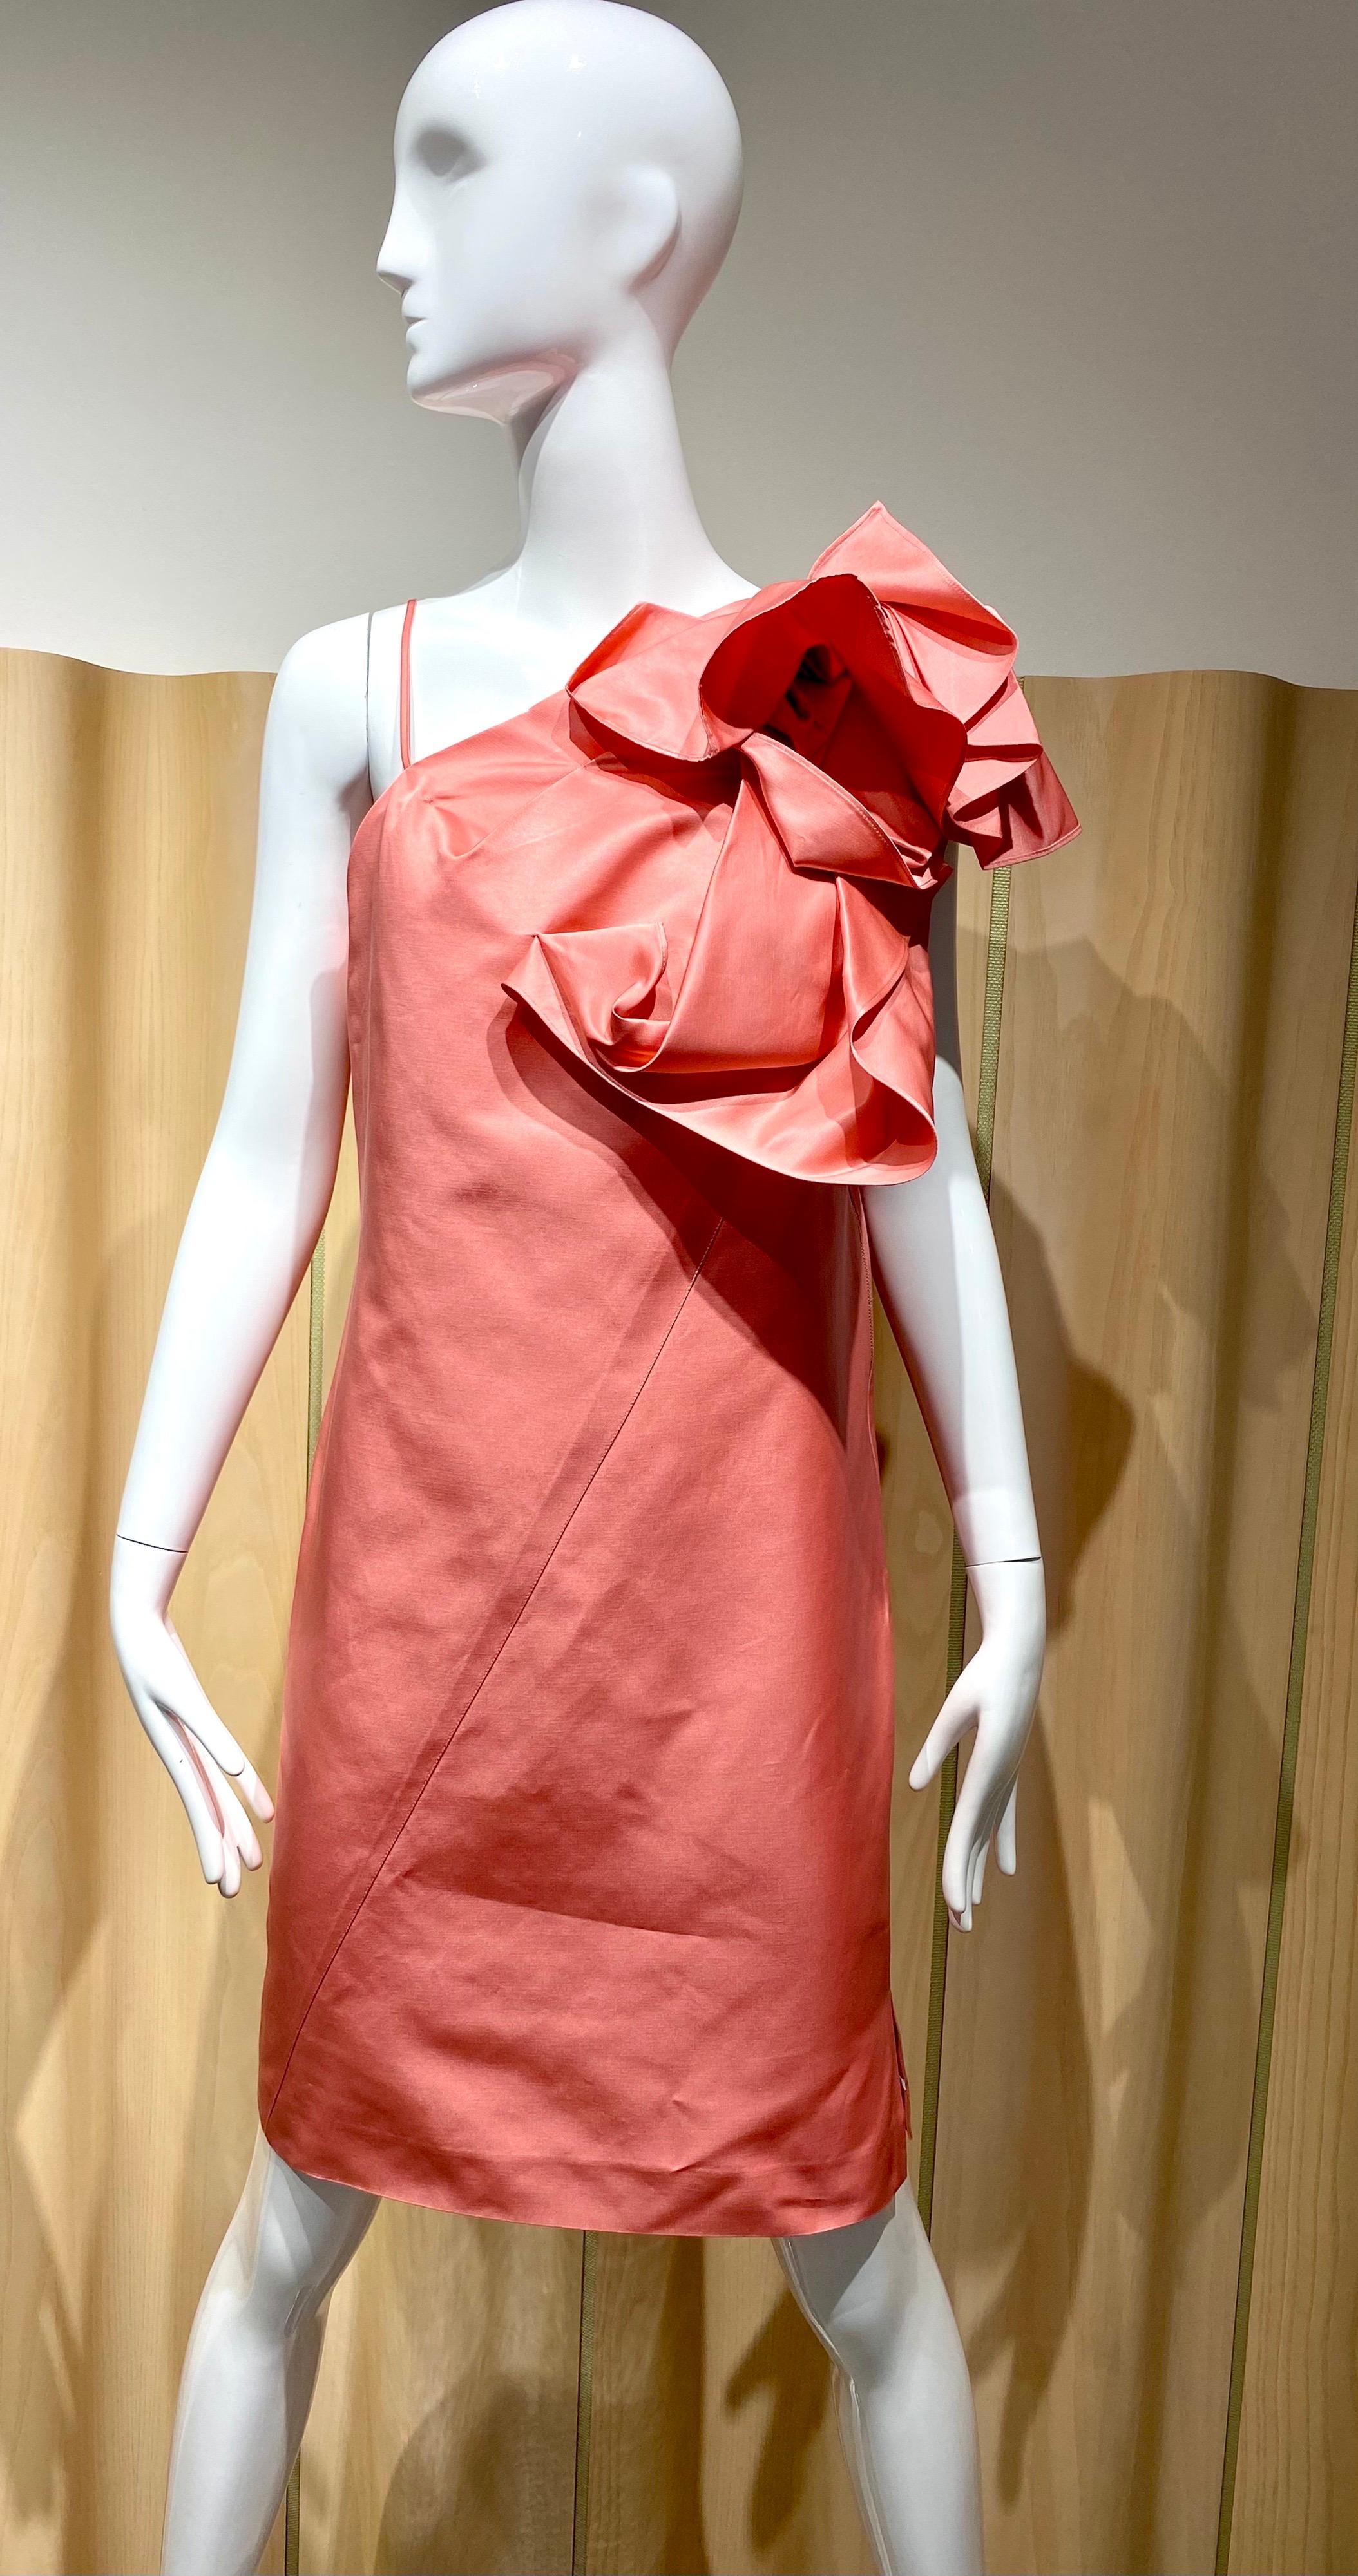 2000s Gianfranco Ferre Coral  cocktail dress with large rosette.
Size : Medium- Large
Bust: 42”/ Waist: 39”/ Hip” 39”/ Dress length: 36” 
